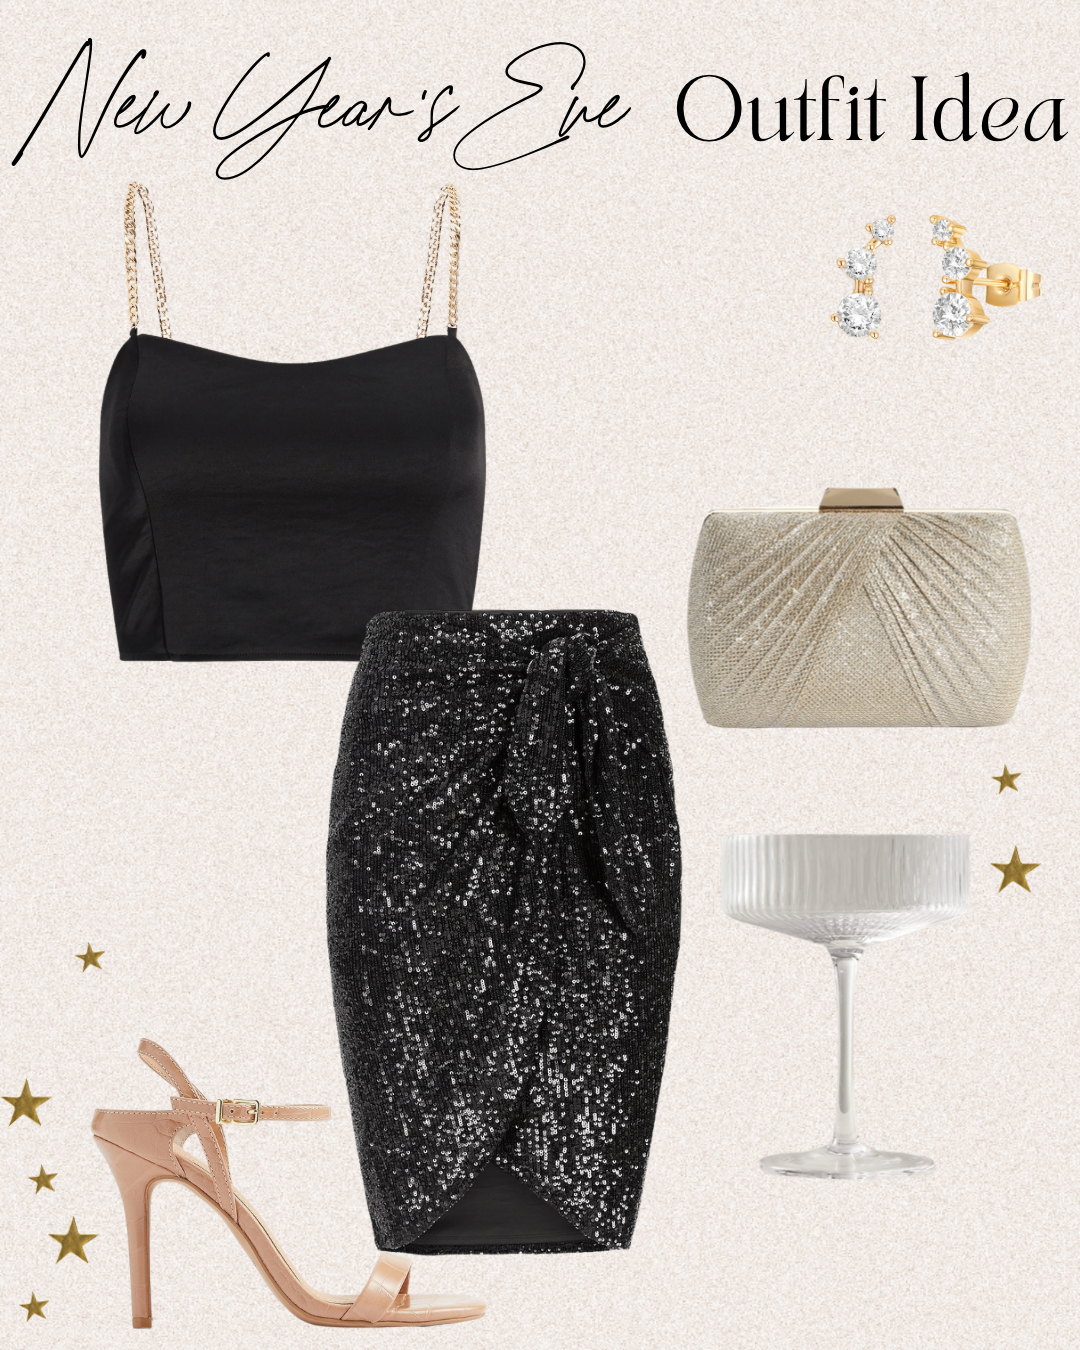 Black Cropped Cami and Black Sequin Mini Skirt Outfit for New Year's Eve 